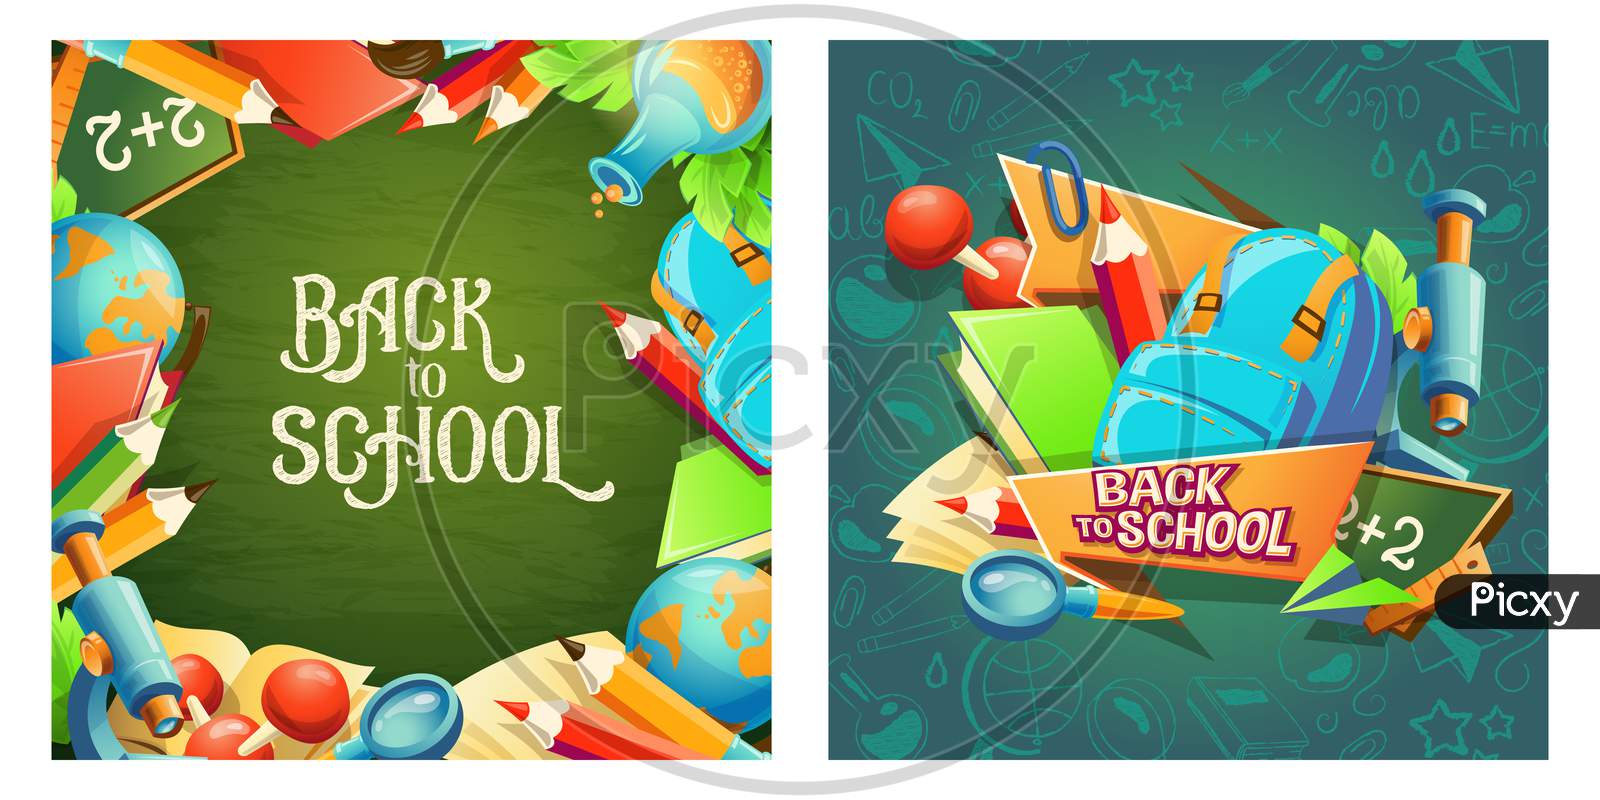 Set Of Vector Cartoon Banners With School Accessories And Inscription Back To School.